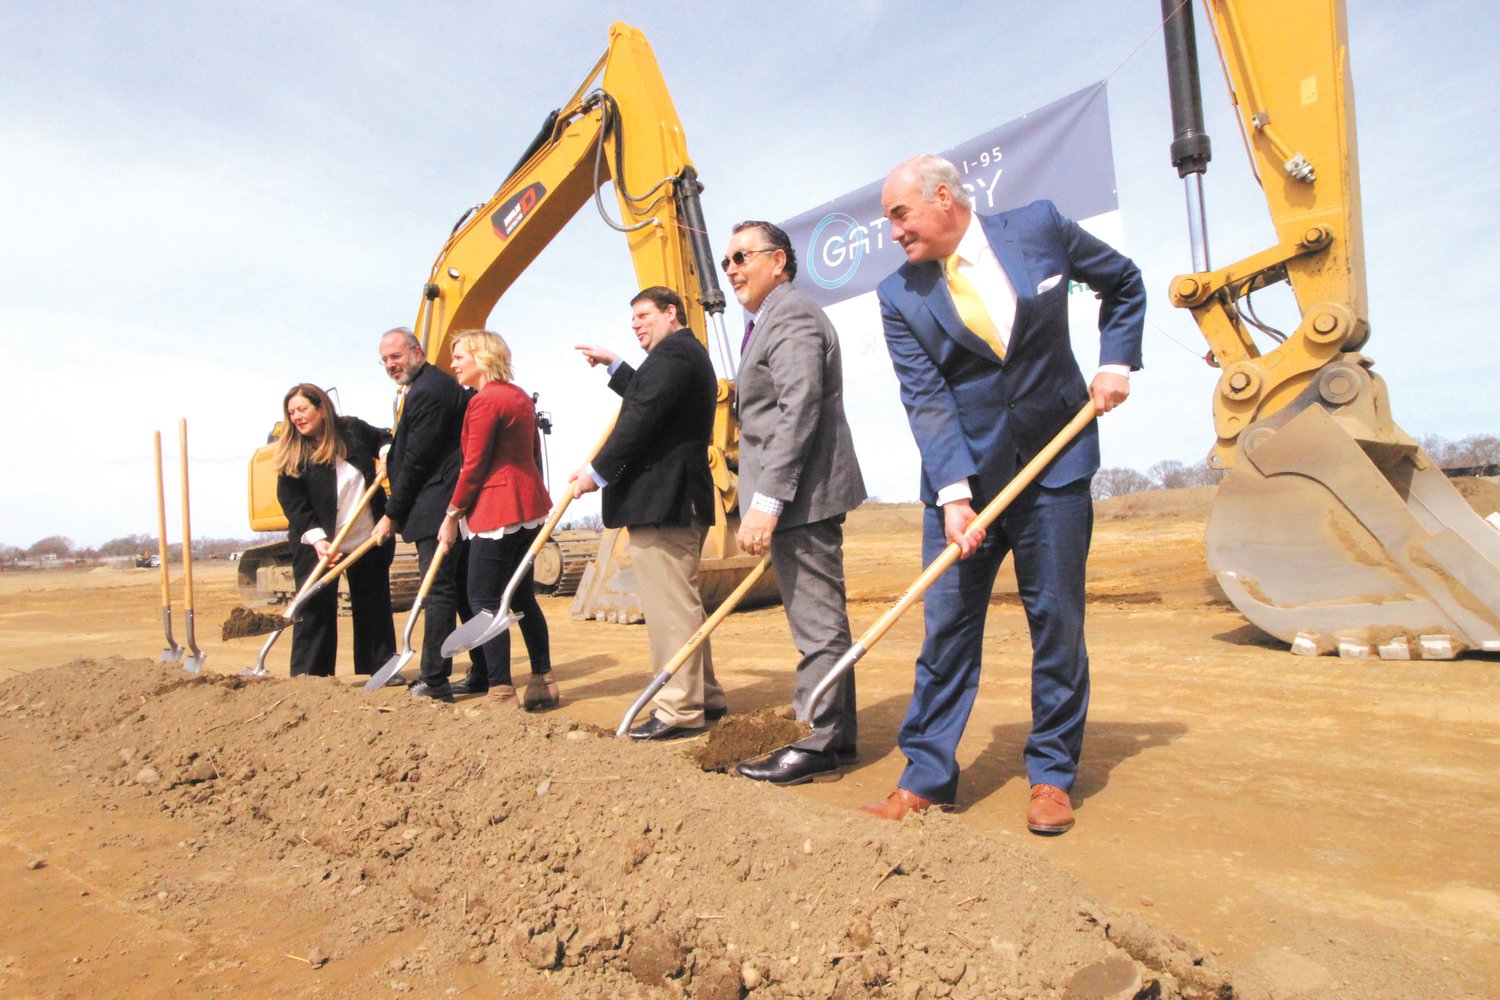 GRAB A SHOVEL: Spotting  there were shovels to spare at Tuesday’s ceremonial groundbreaking of the NorthPoint  489,000 square foot warehouse off Airport Road, Council President Steve McAllister points  to  Ward 1 Councilman Bill Foley to  join the group. According to Natasha Rickel a spokesperson for NorthPoint the project is “currently scheduled to deliver late November.” Pictured with McAllister is Eva Mancuso special advisor to the governor,  Commerce Secretary Stefan Pryor, Regional Vice President for NorthPoint Development Christina Hubacek, Tom Moses,  attorney for NorthPoint and Kelly Coates, president of Carpionato Group that sold the property to NorthPoint. (Warwick Beacon photo)